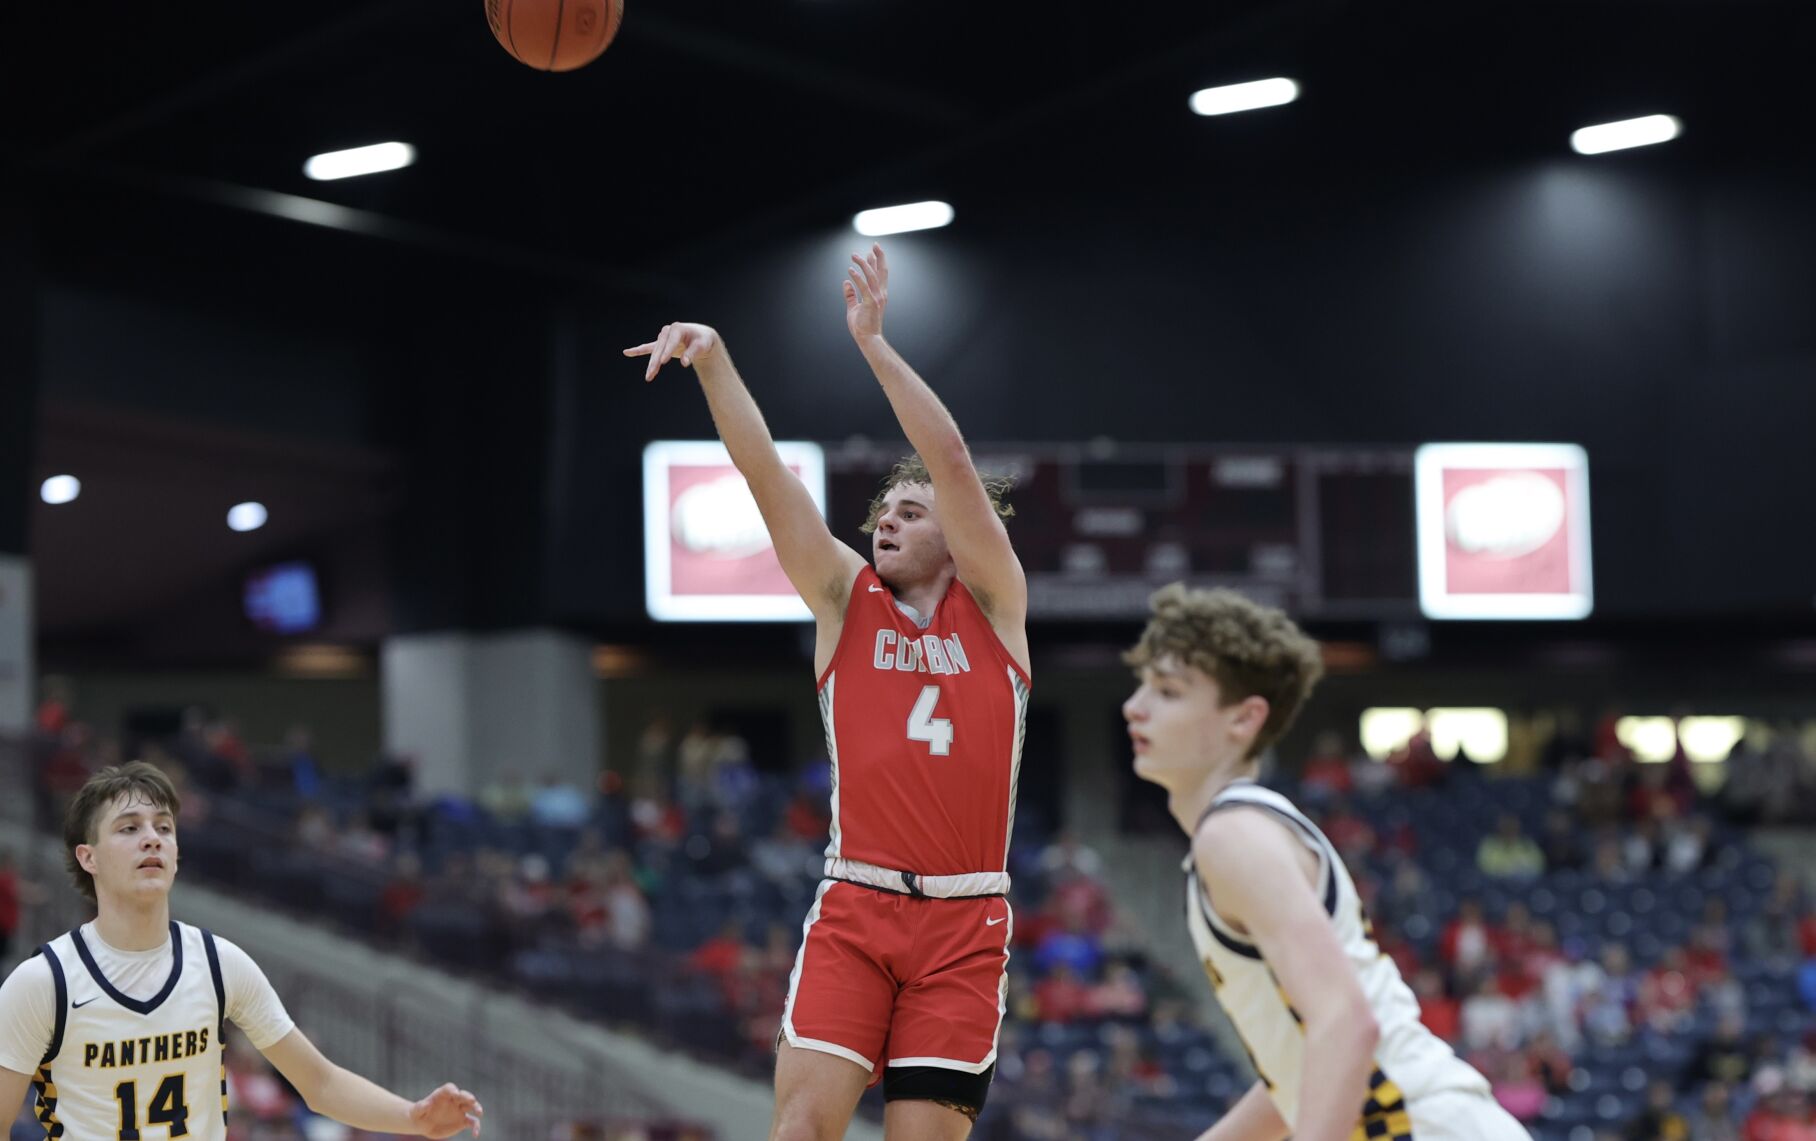 Corbin Redhounds Reach 13th Region Finals After Beating Knox Central 66-60